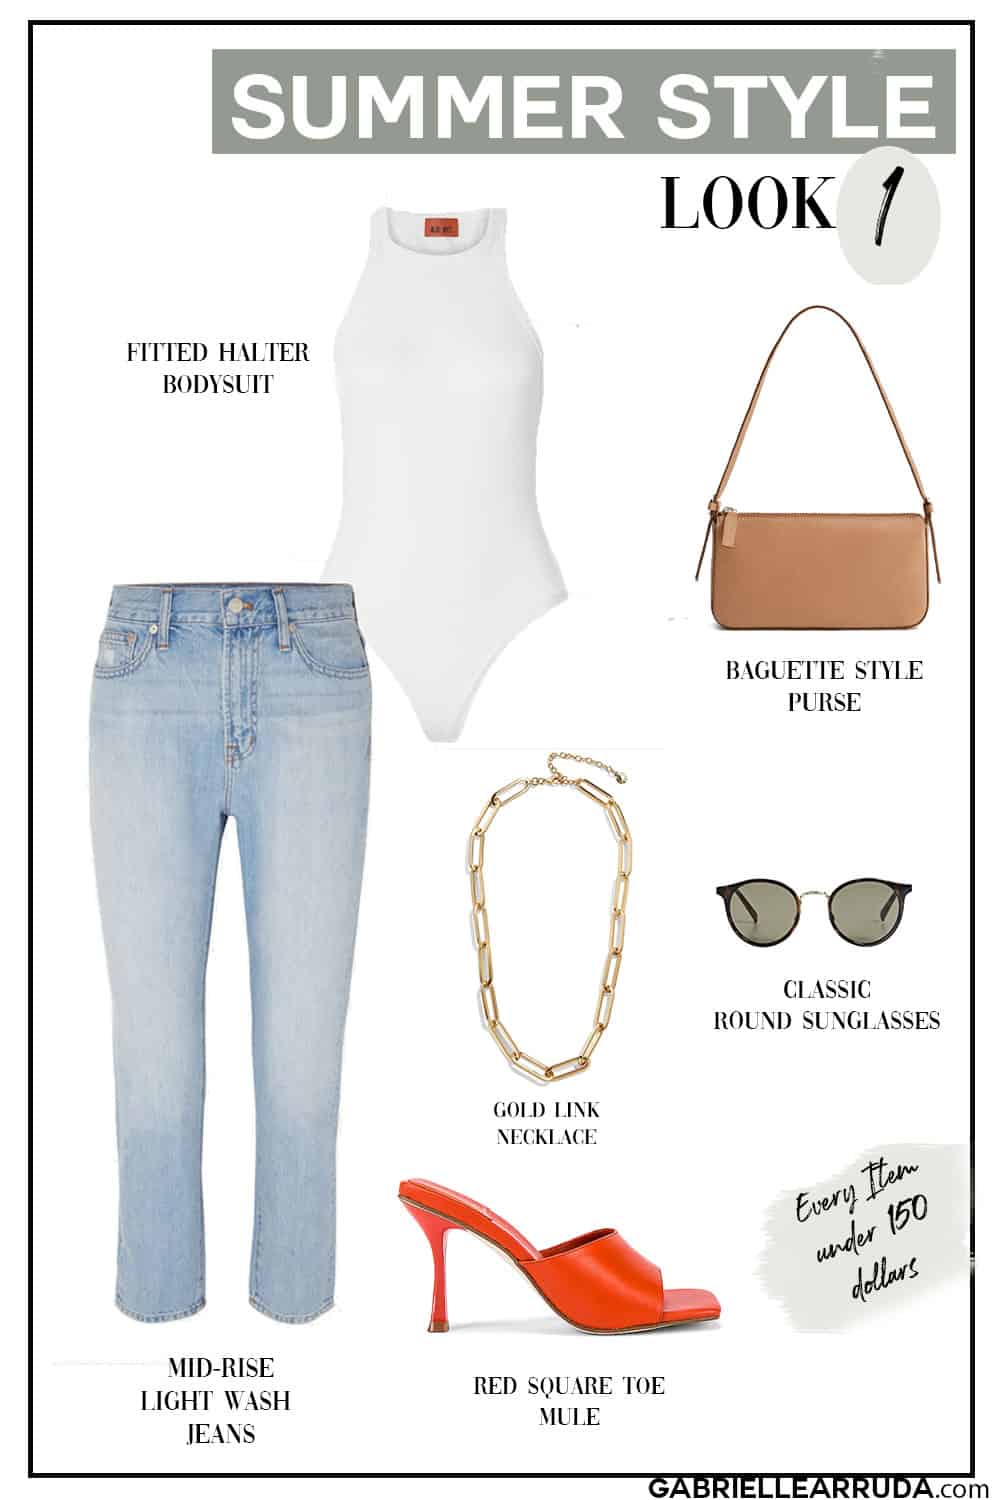 summer outfit based on capsule wardrobe, mid rise jeans, bodysuit, red mule, gold link necklace, baguette style purse